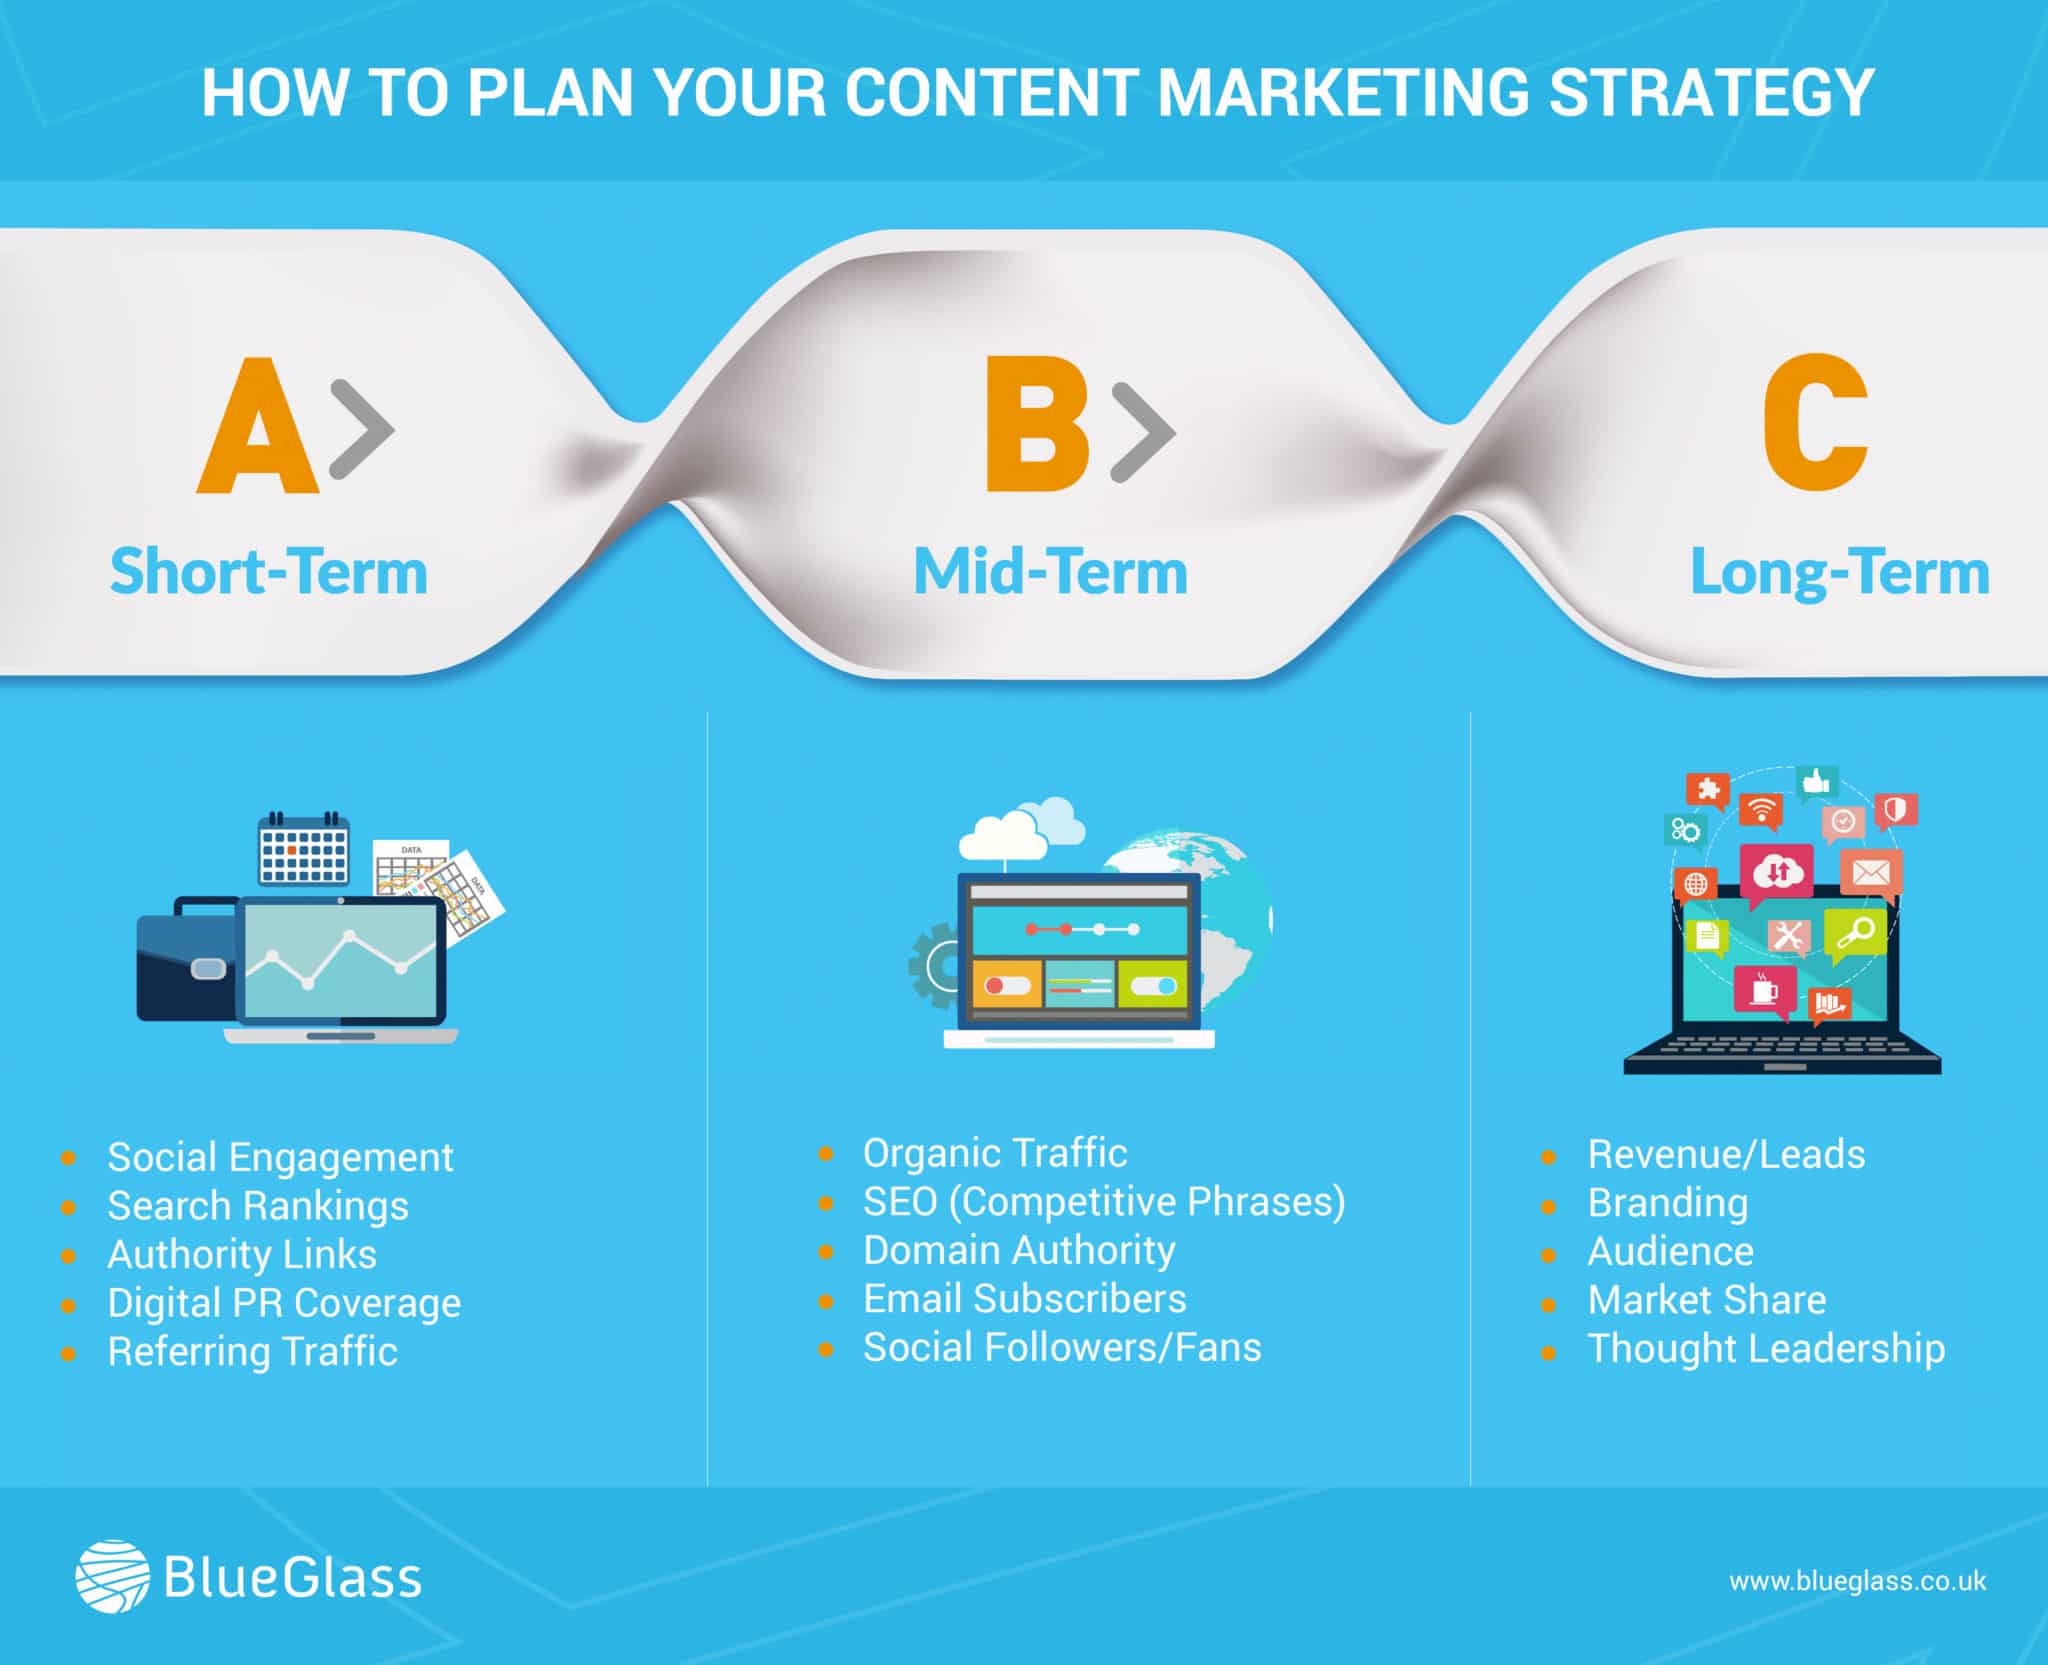 How to plan your content marketing strategy